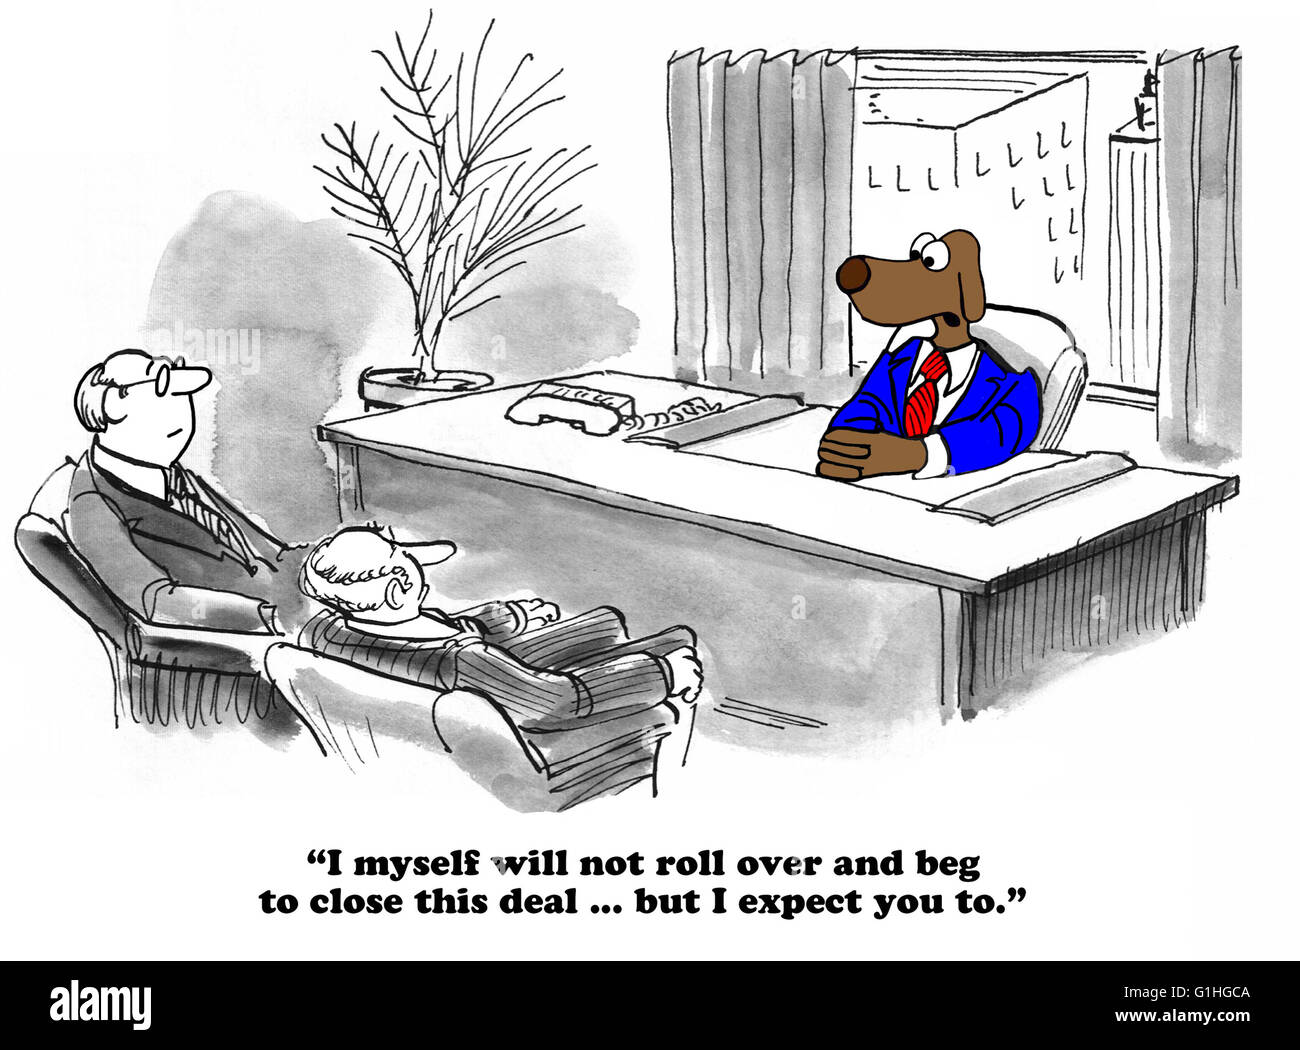 Business cartoon about begging to close a deal. Stock Photo